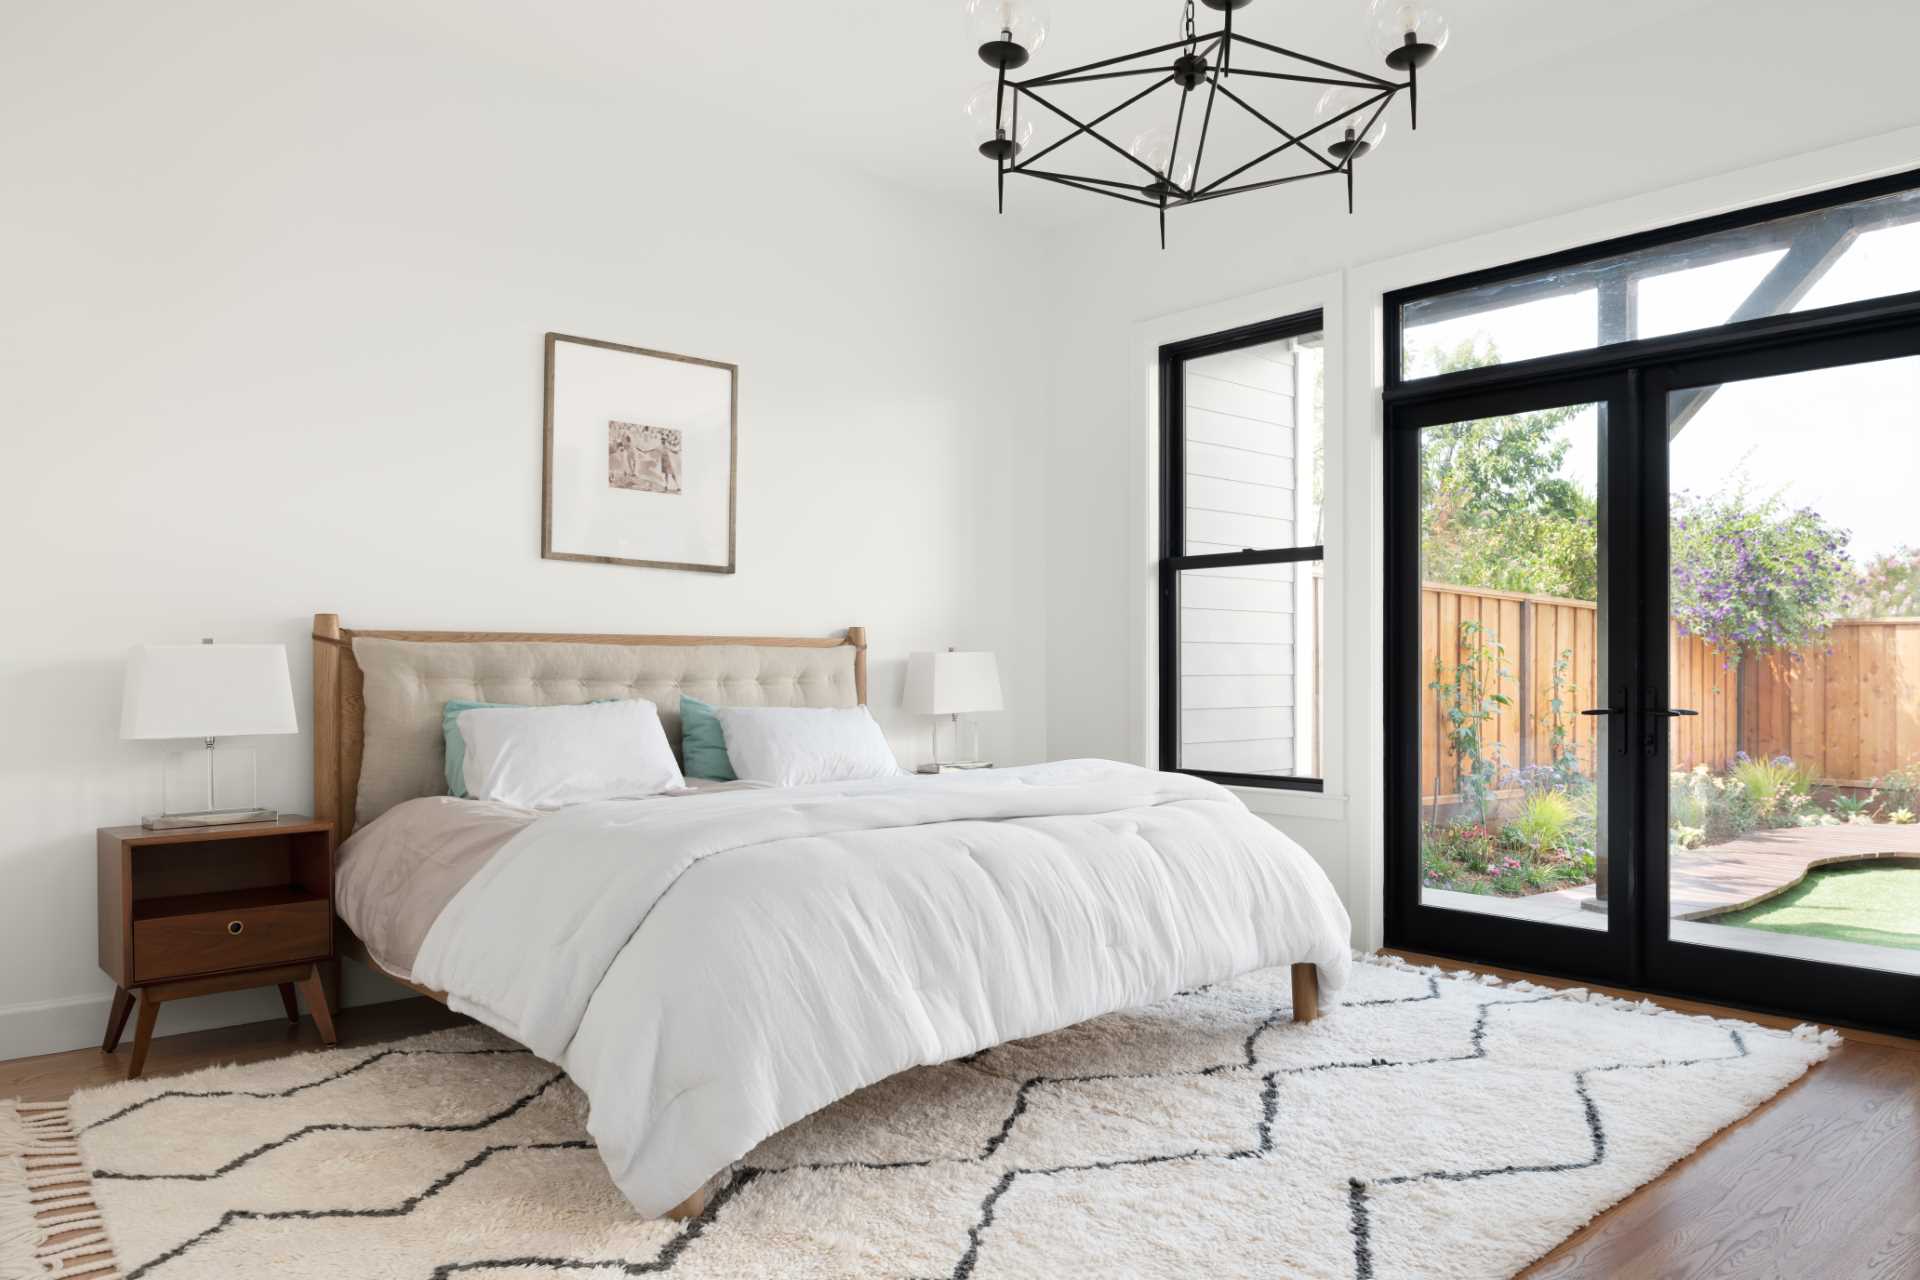 In this modern bedroom, black-framed windows and doors provide a view of the rear yard.